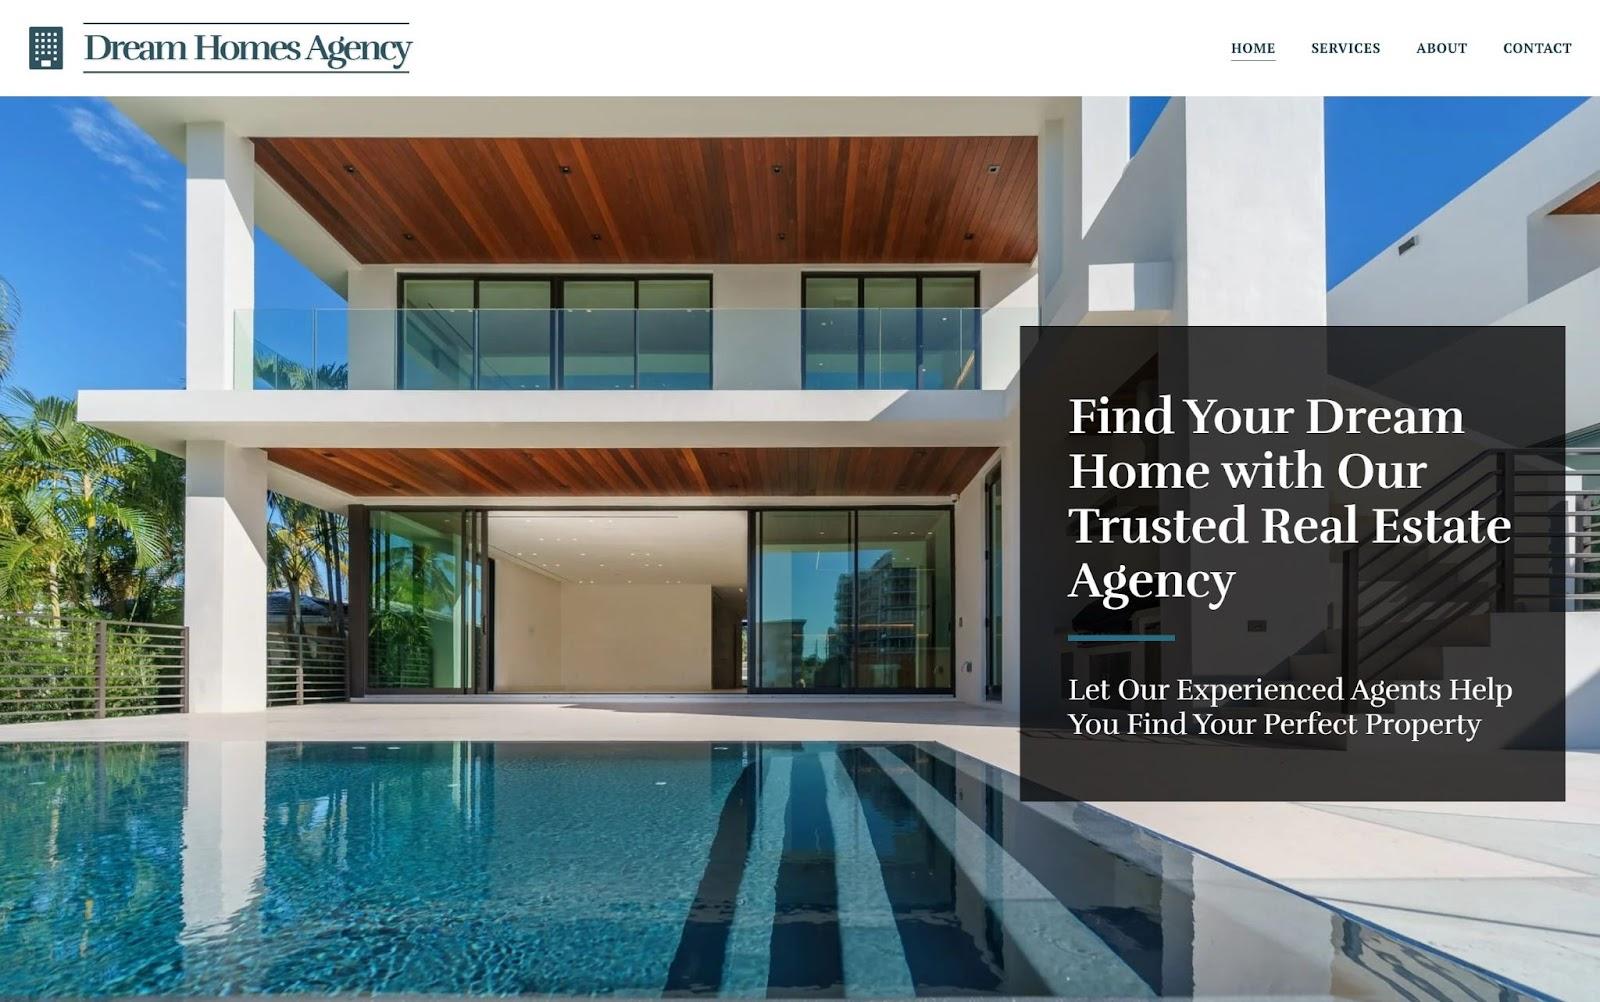 SITE123 Dream Homes Agency template